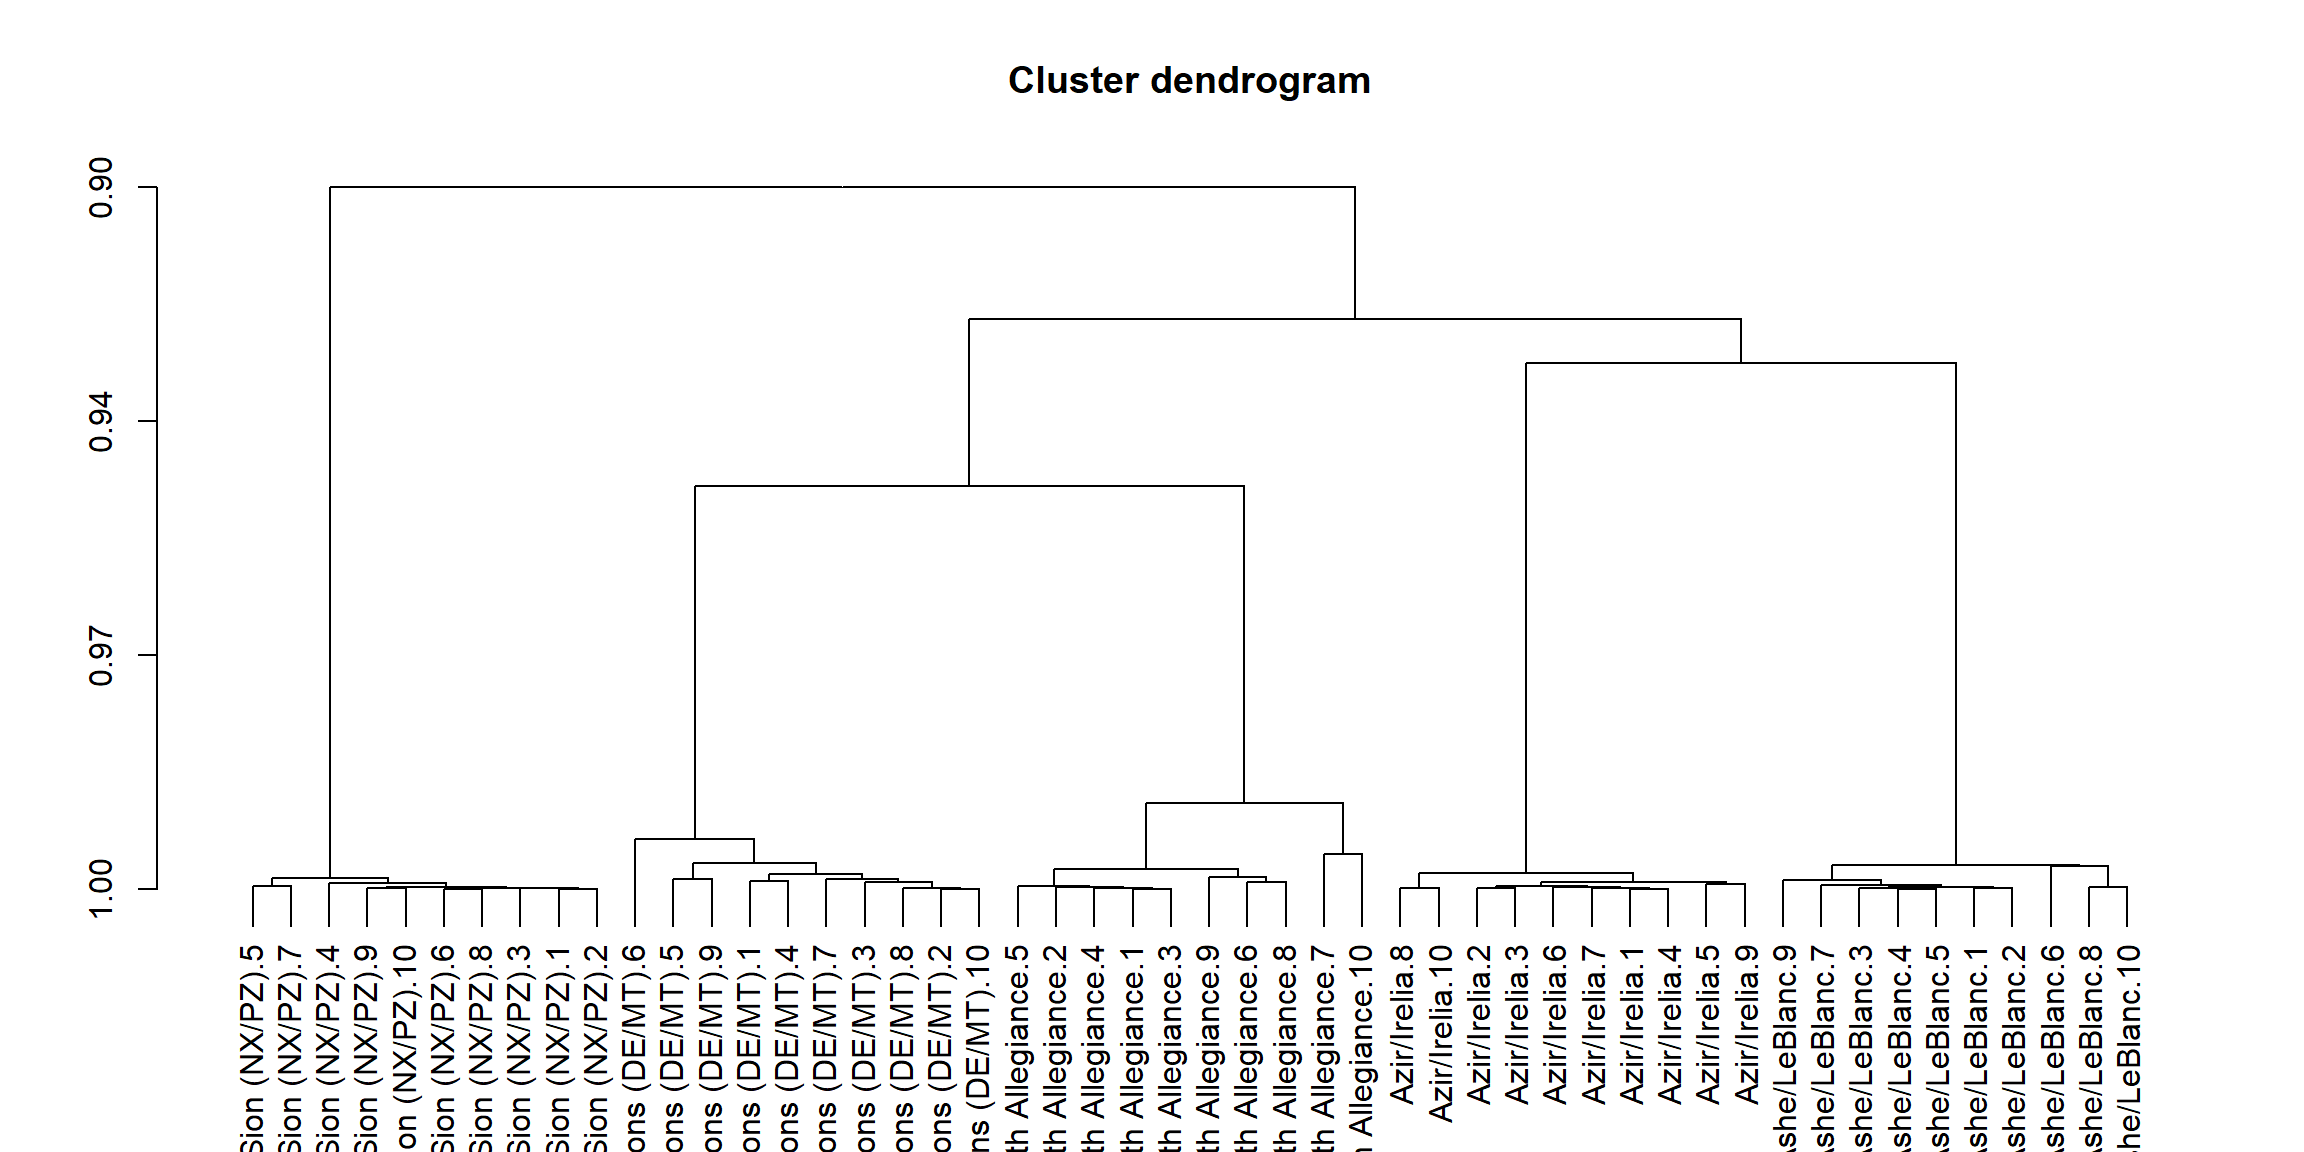 Dendogram obtained by applying APcluster to the example data set